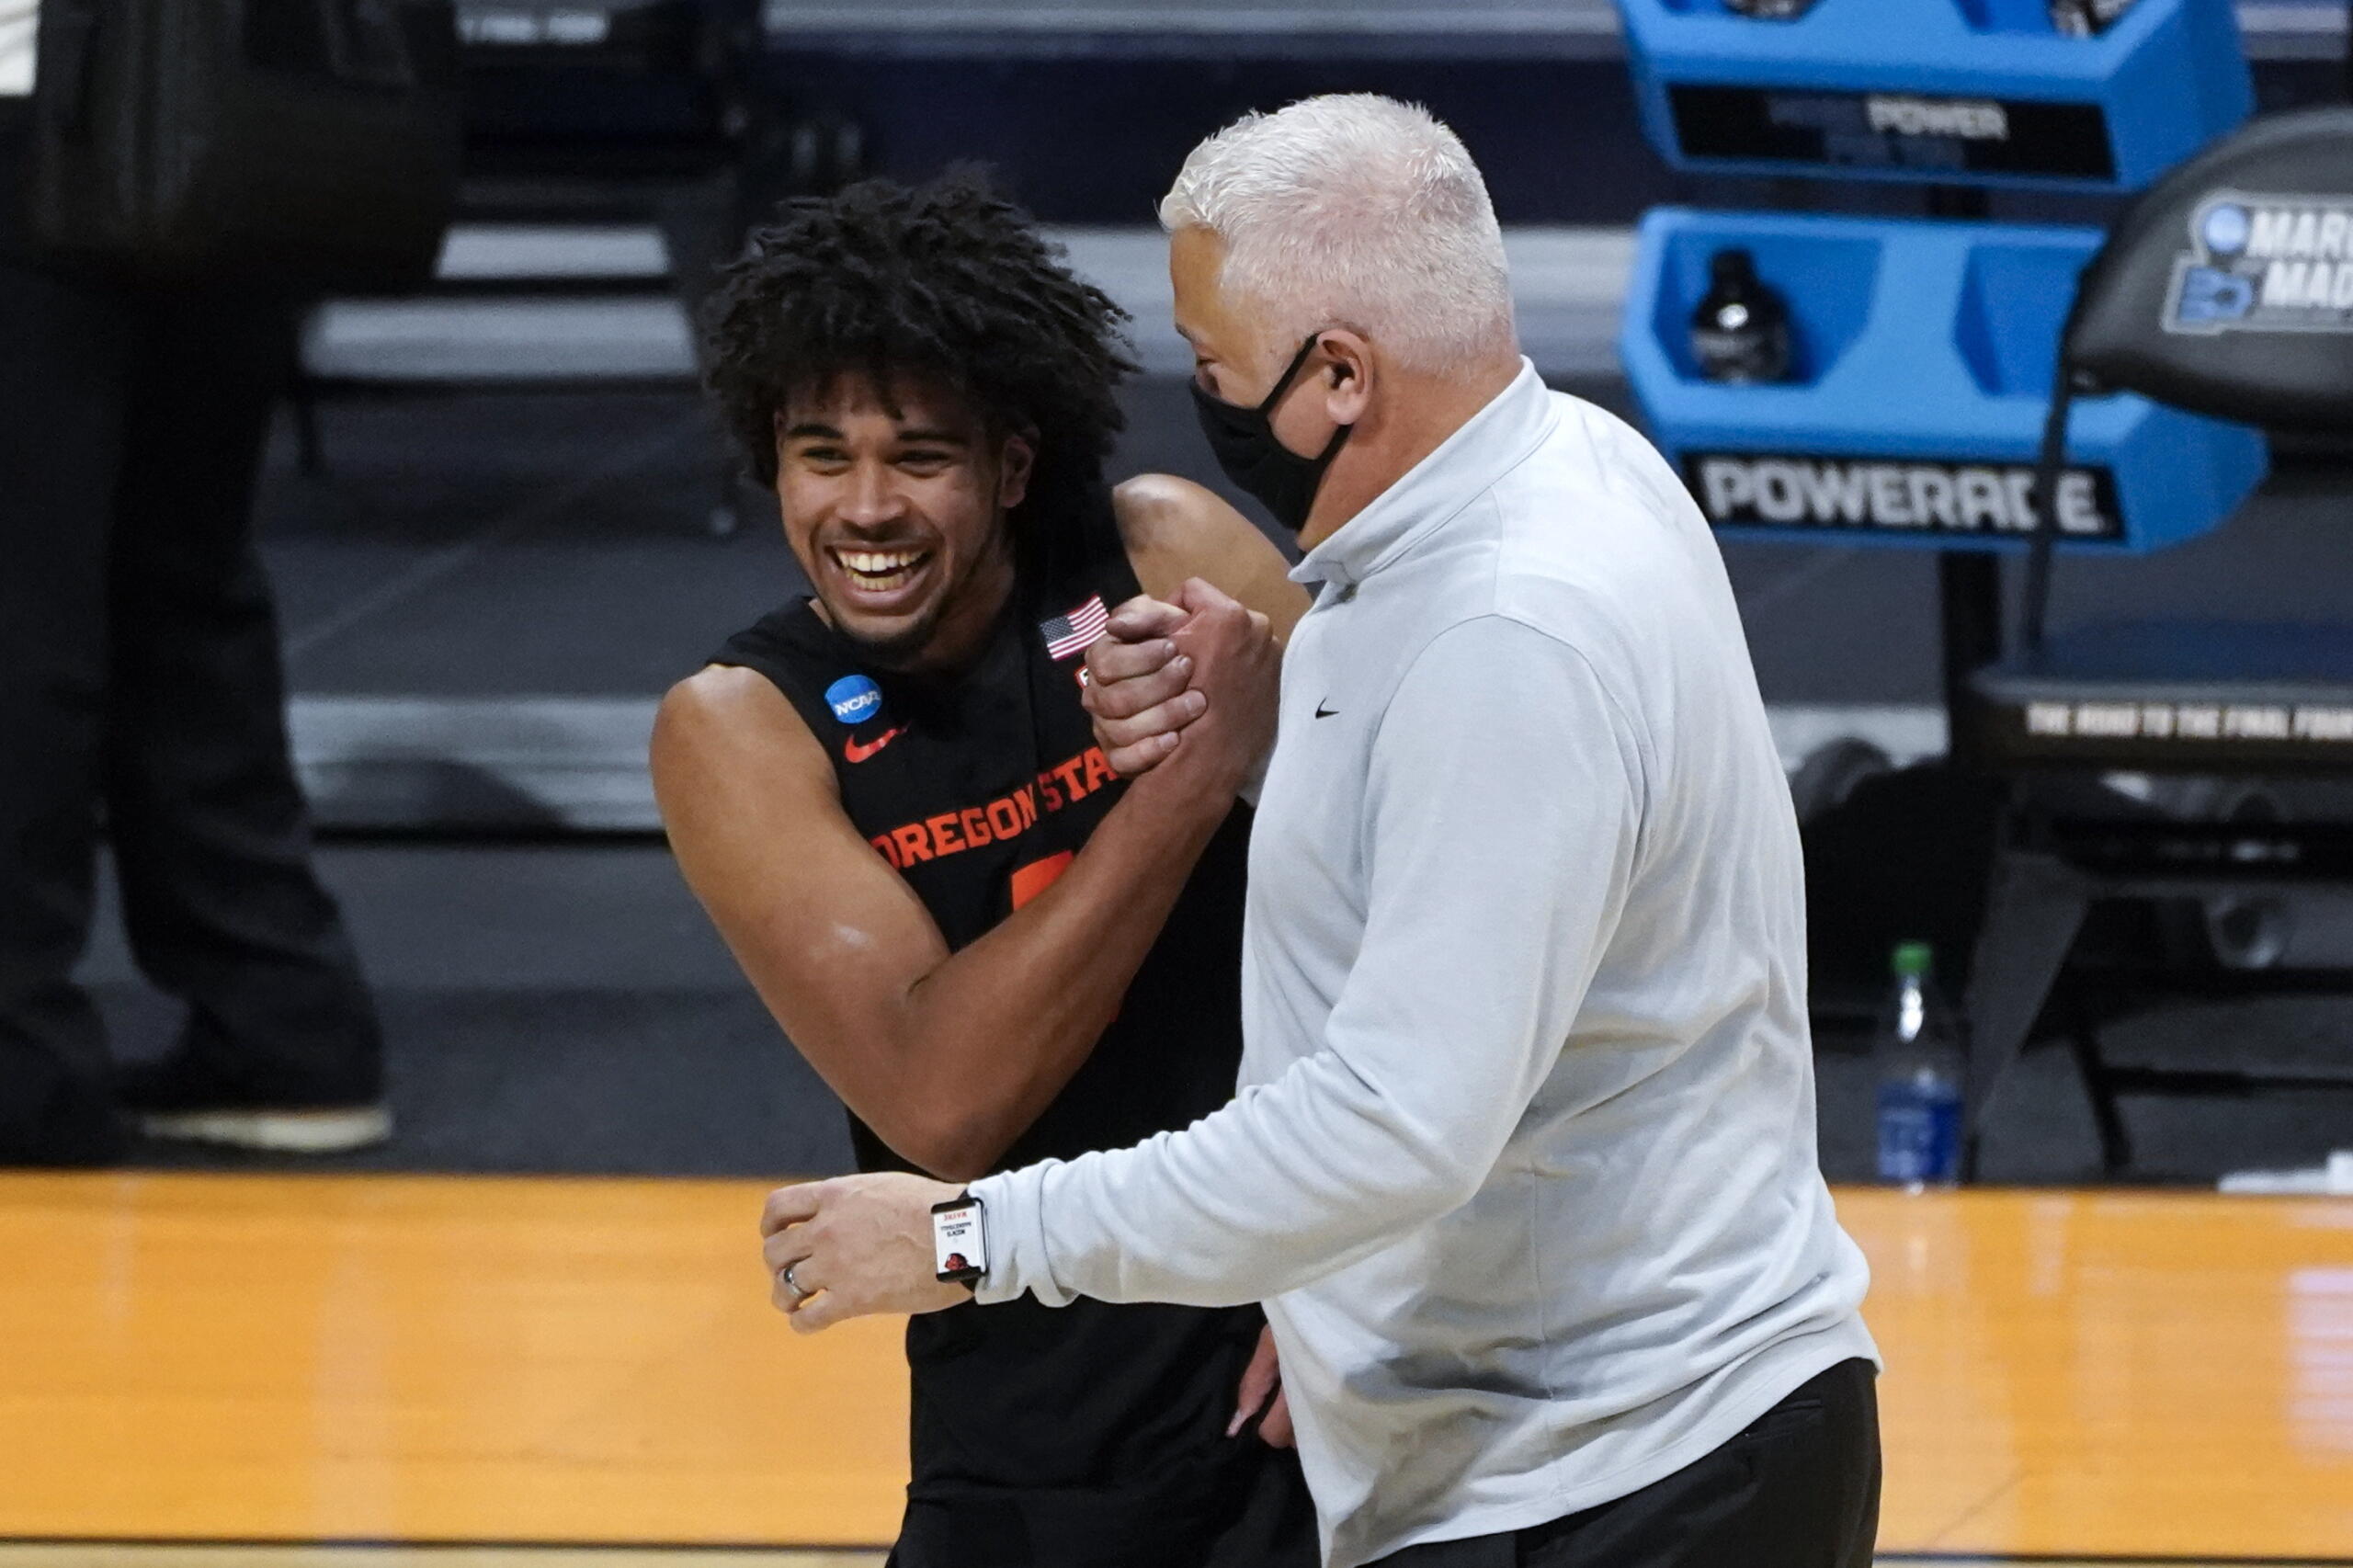 Oregon State guard Ethan Thompson (5) and head coach Wayne Tinkle celebrate beating Oklahoma State 80-70 after a men's college basketball game in the second round of the NCAA tournament at Hinkle Fieldhouse in Indianapolis, Monday, March 22, 2021.